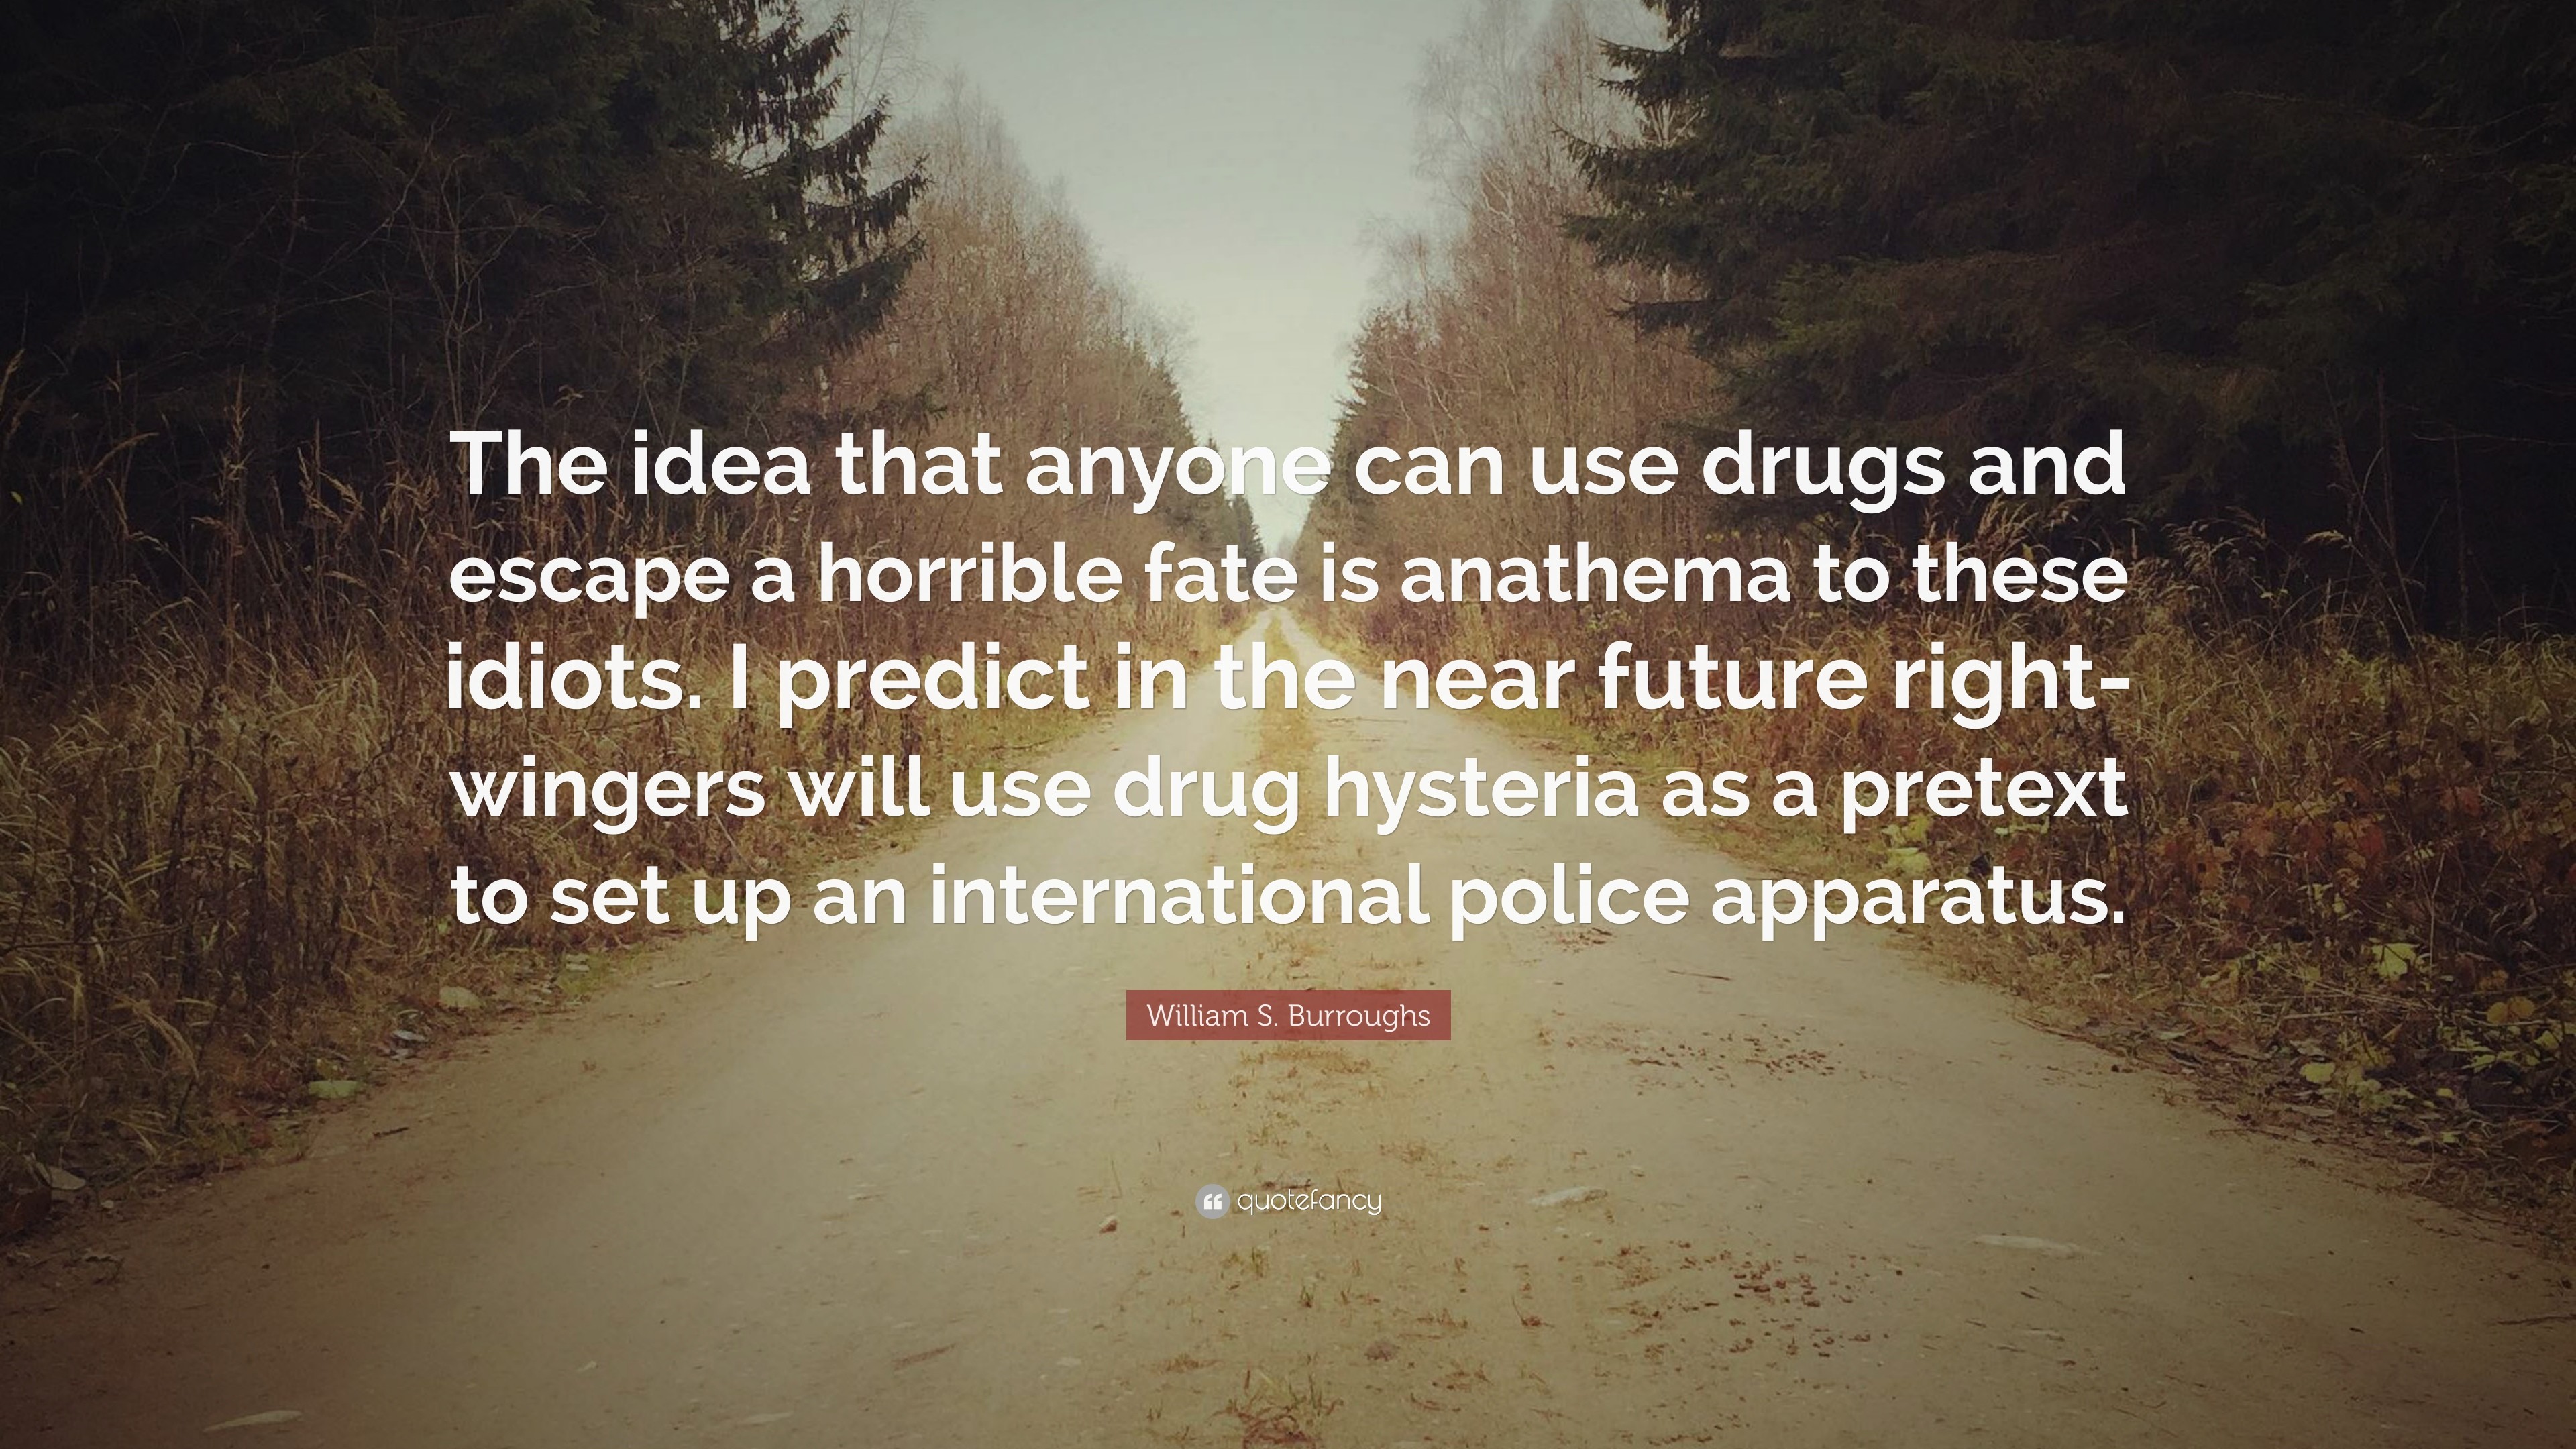 3840x2160 William S. Burroughs Quote: “The idea that anyone can use drugs and escape